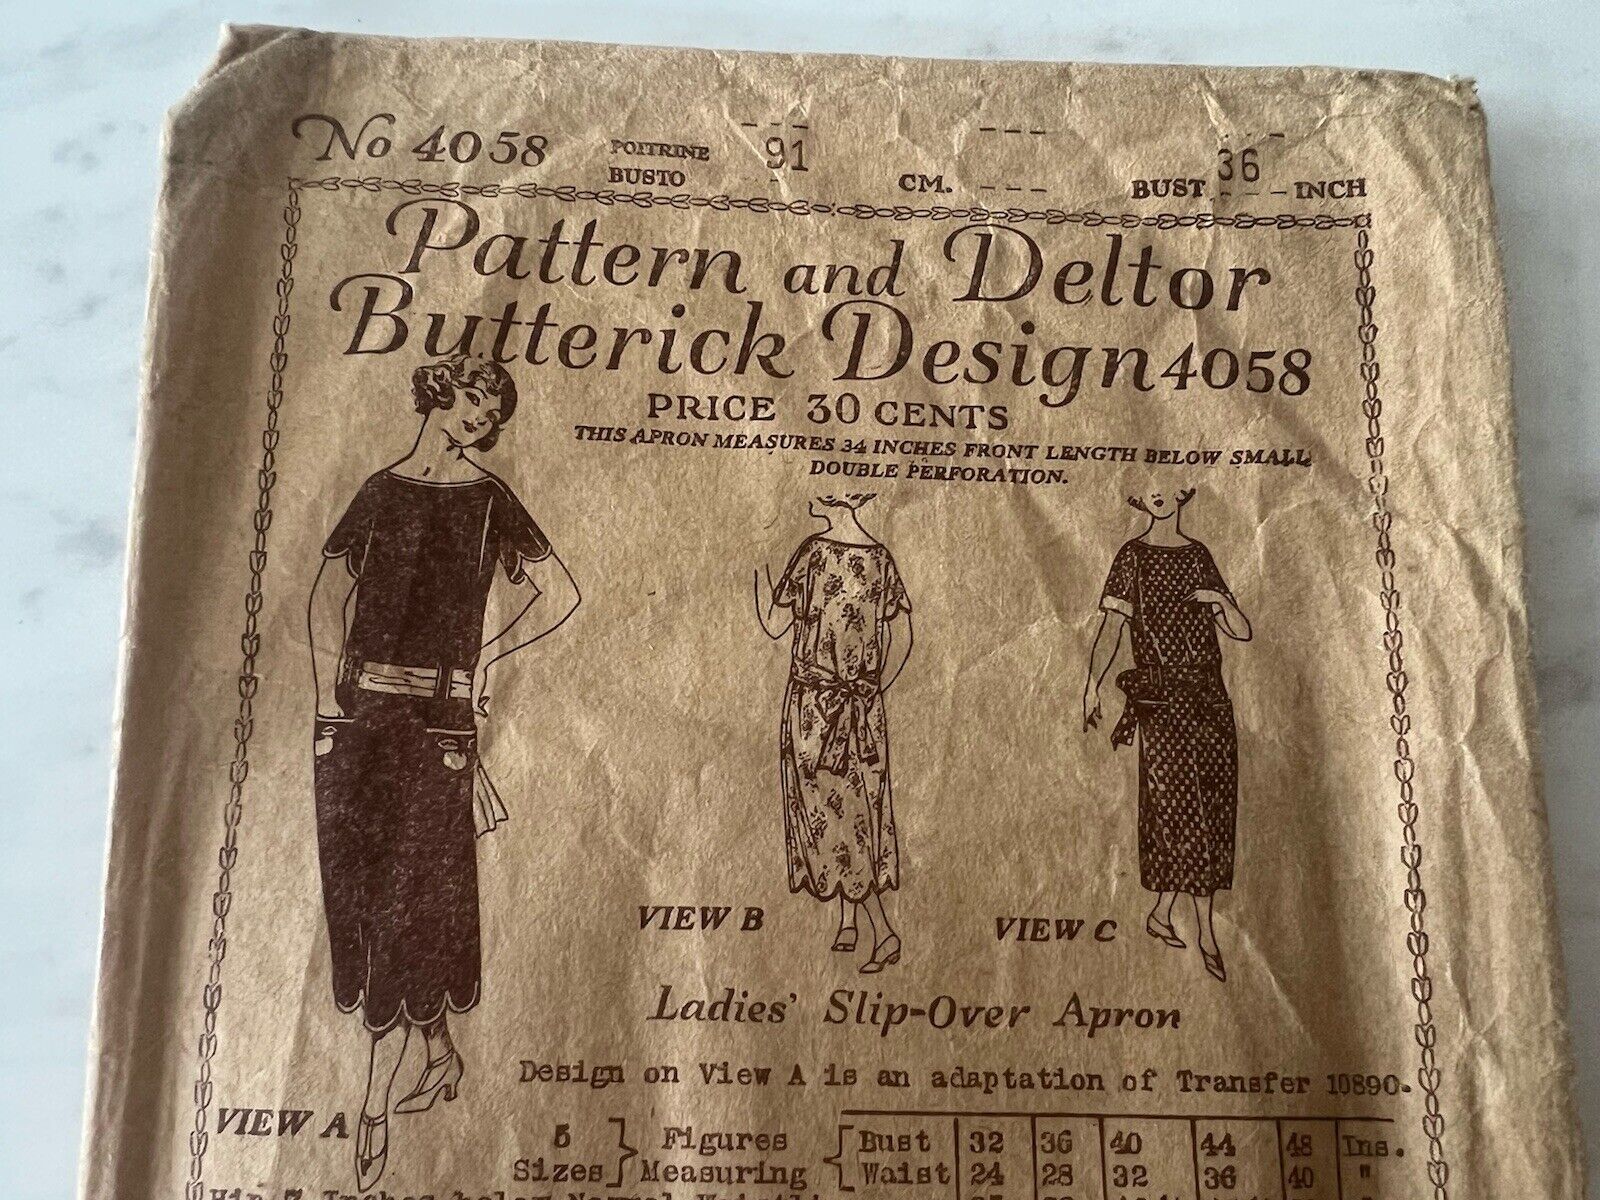 Antique Sewing Pattern 1920s Butterick Women’s Slip Over Apron Bust 36 Inch 4058